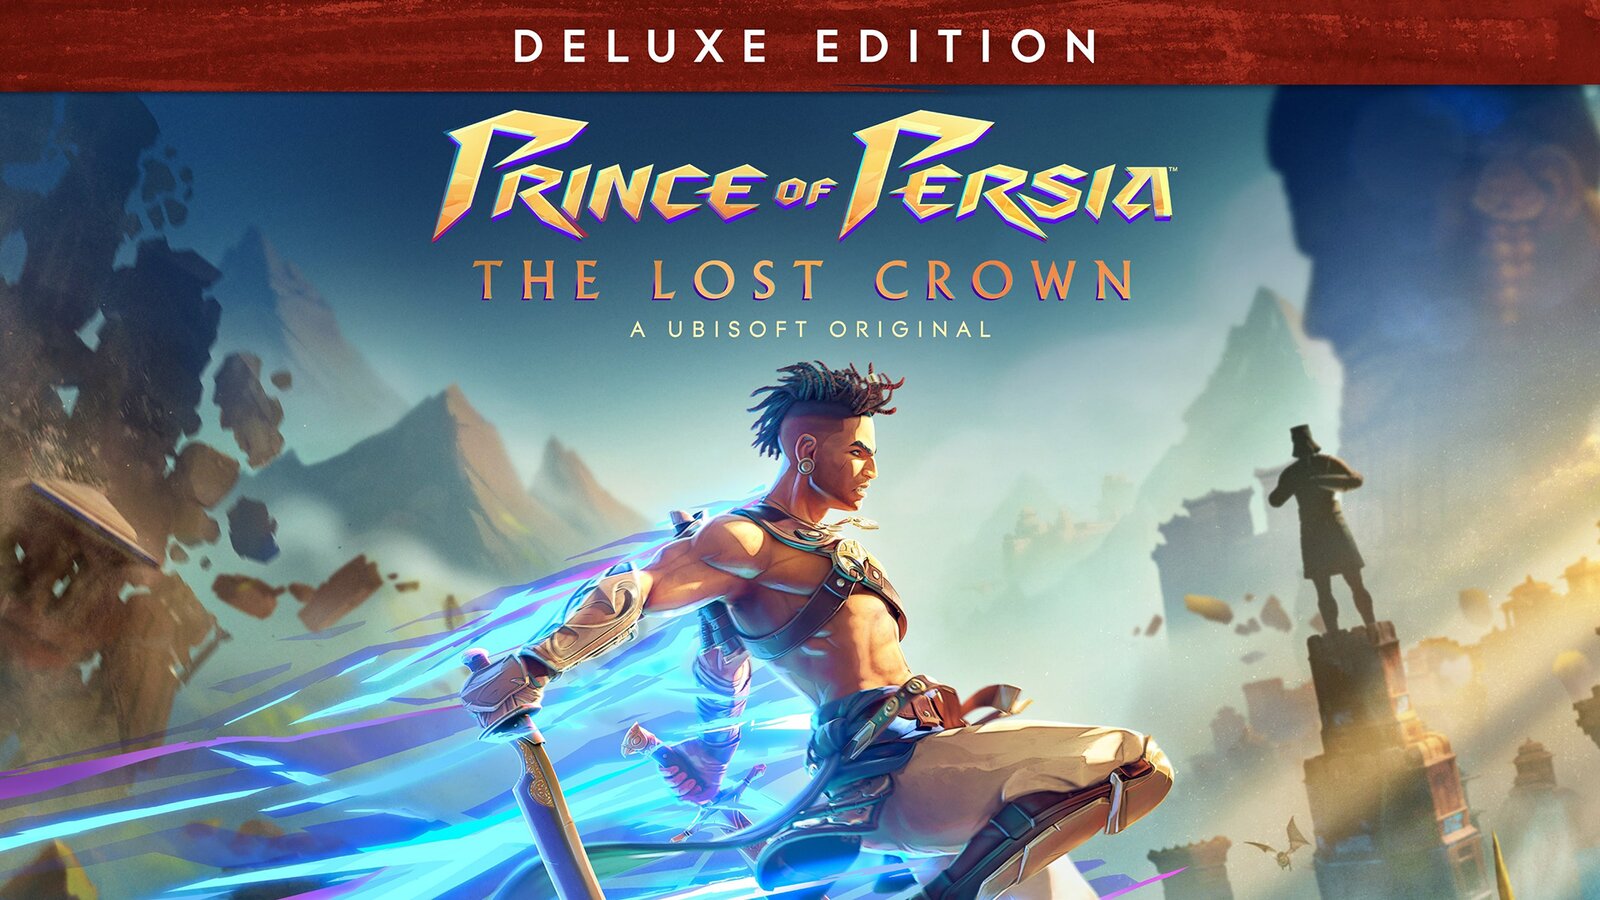 Prince of Persia The Lost Crown - Deluxe Edition